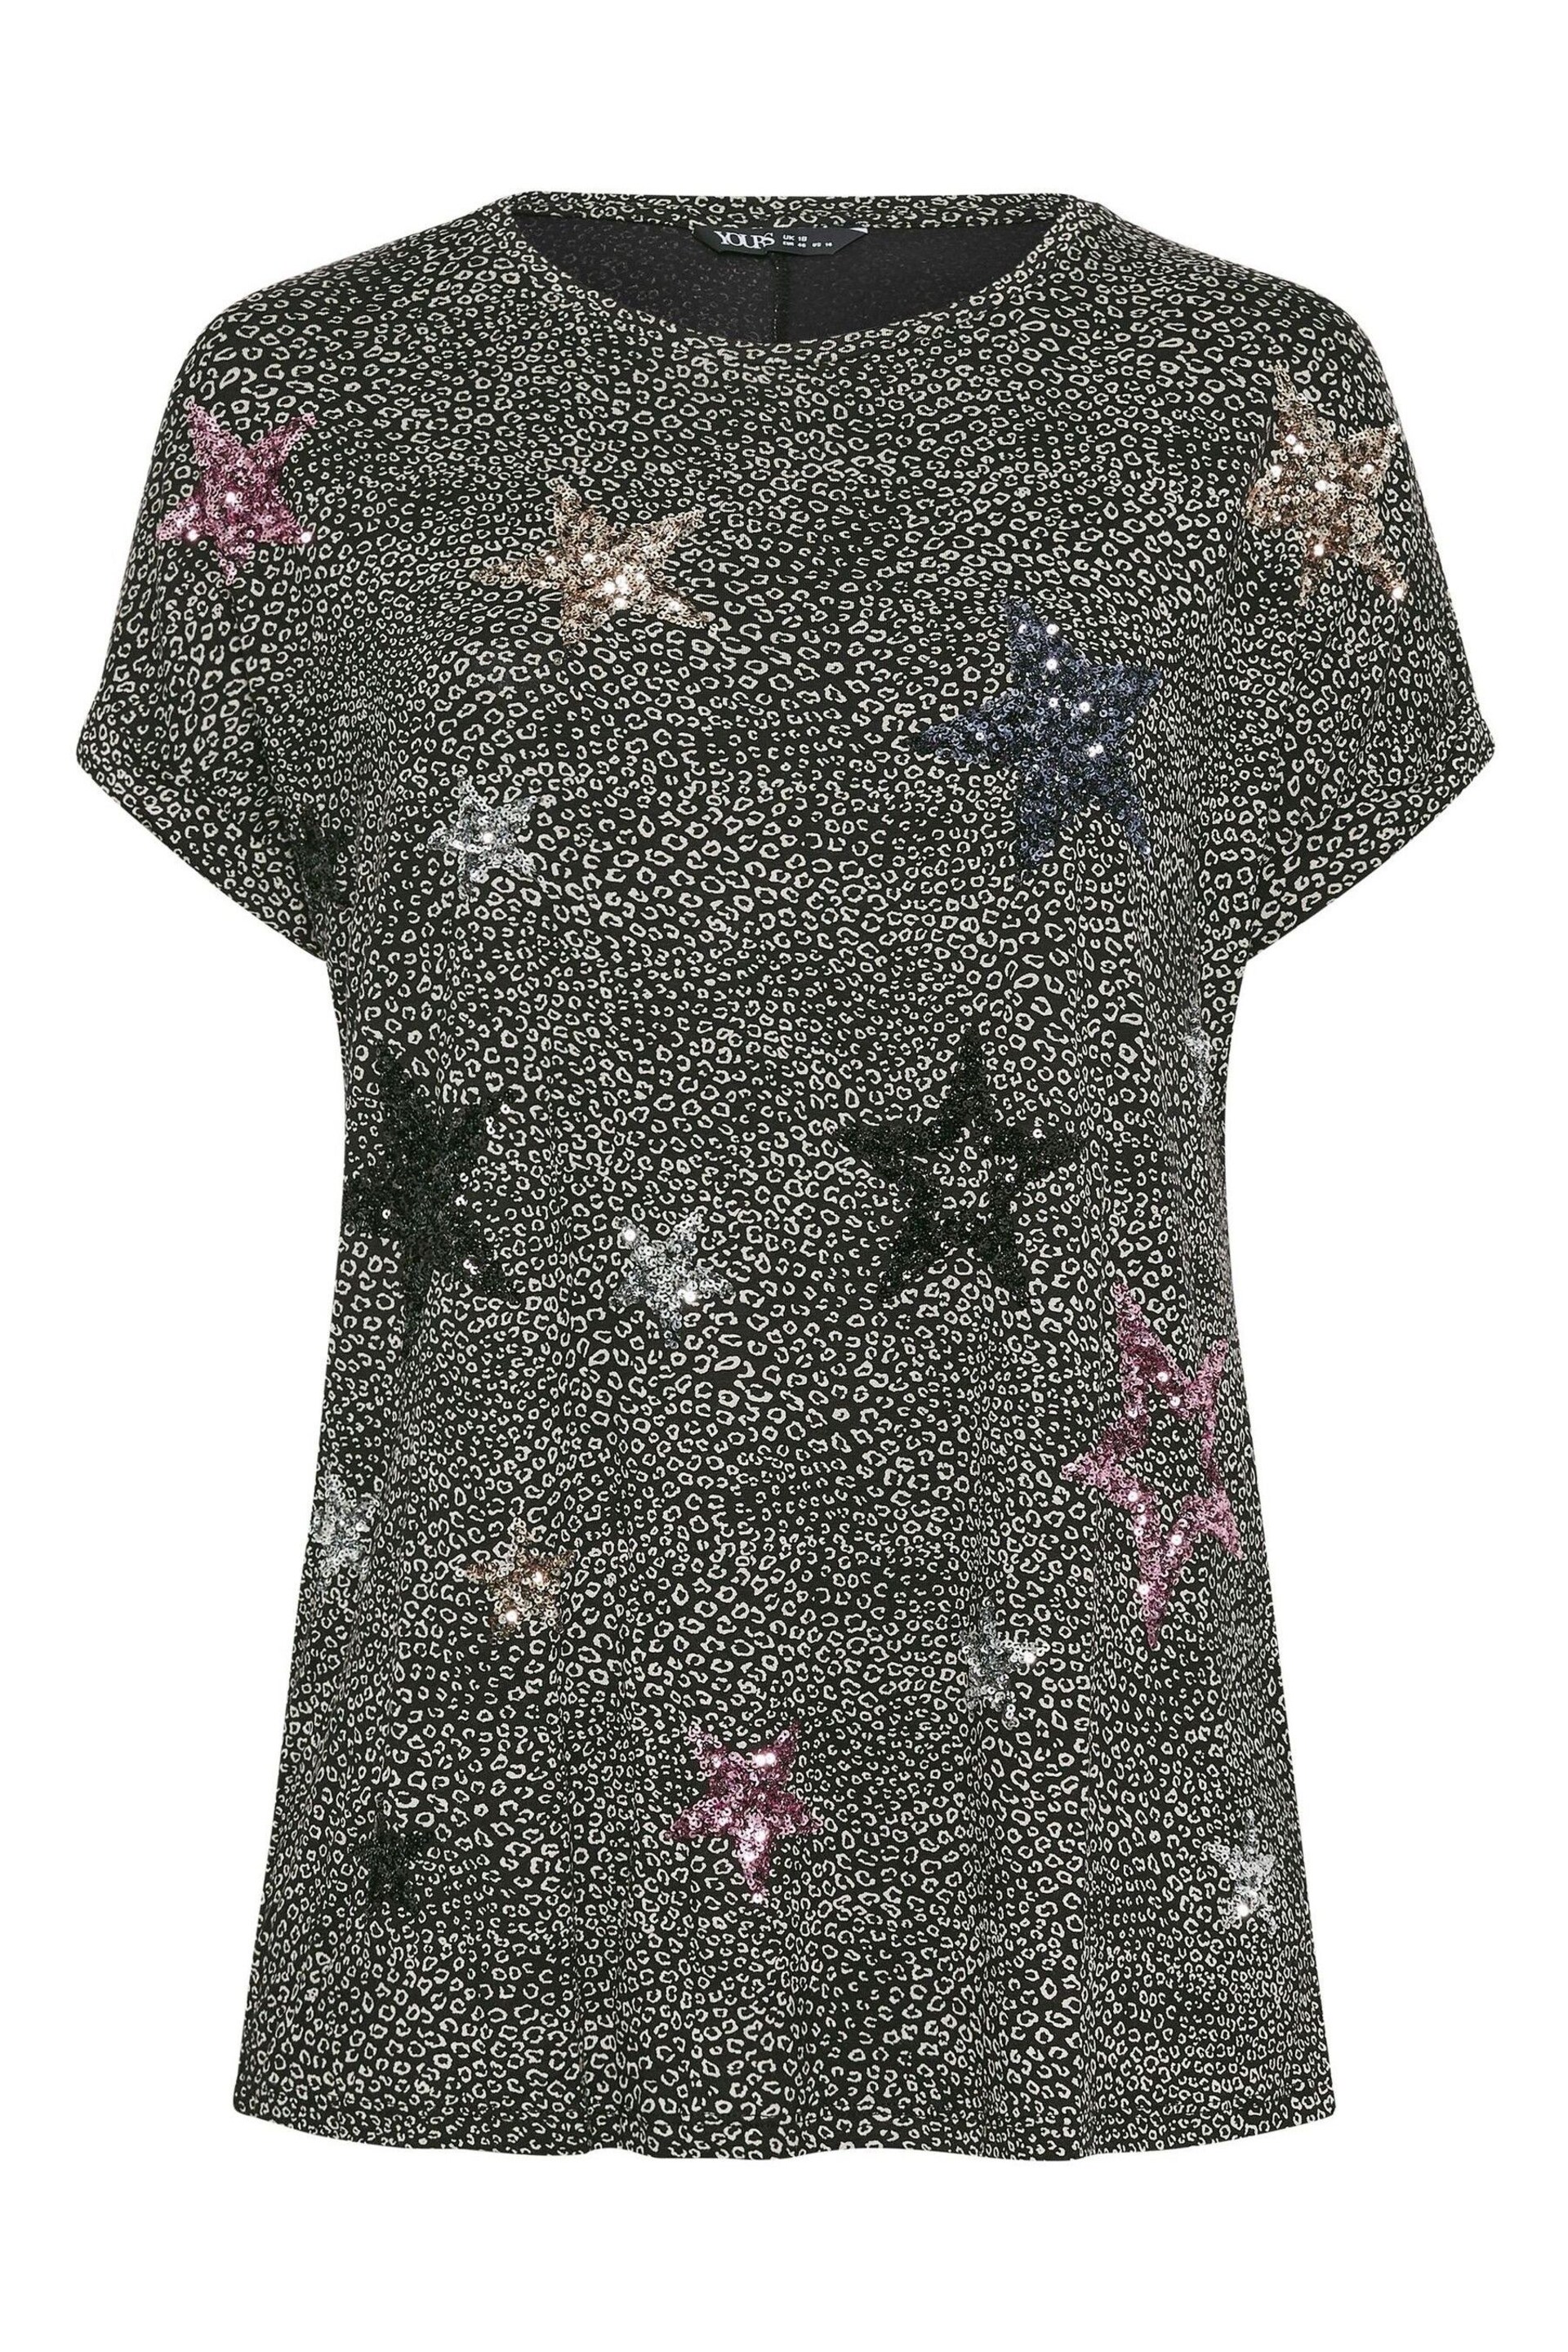 Yours Curve Black White Star Embellished Top - Image 5 of 5